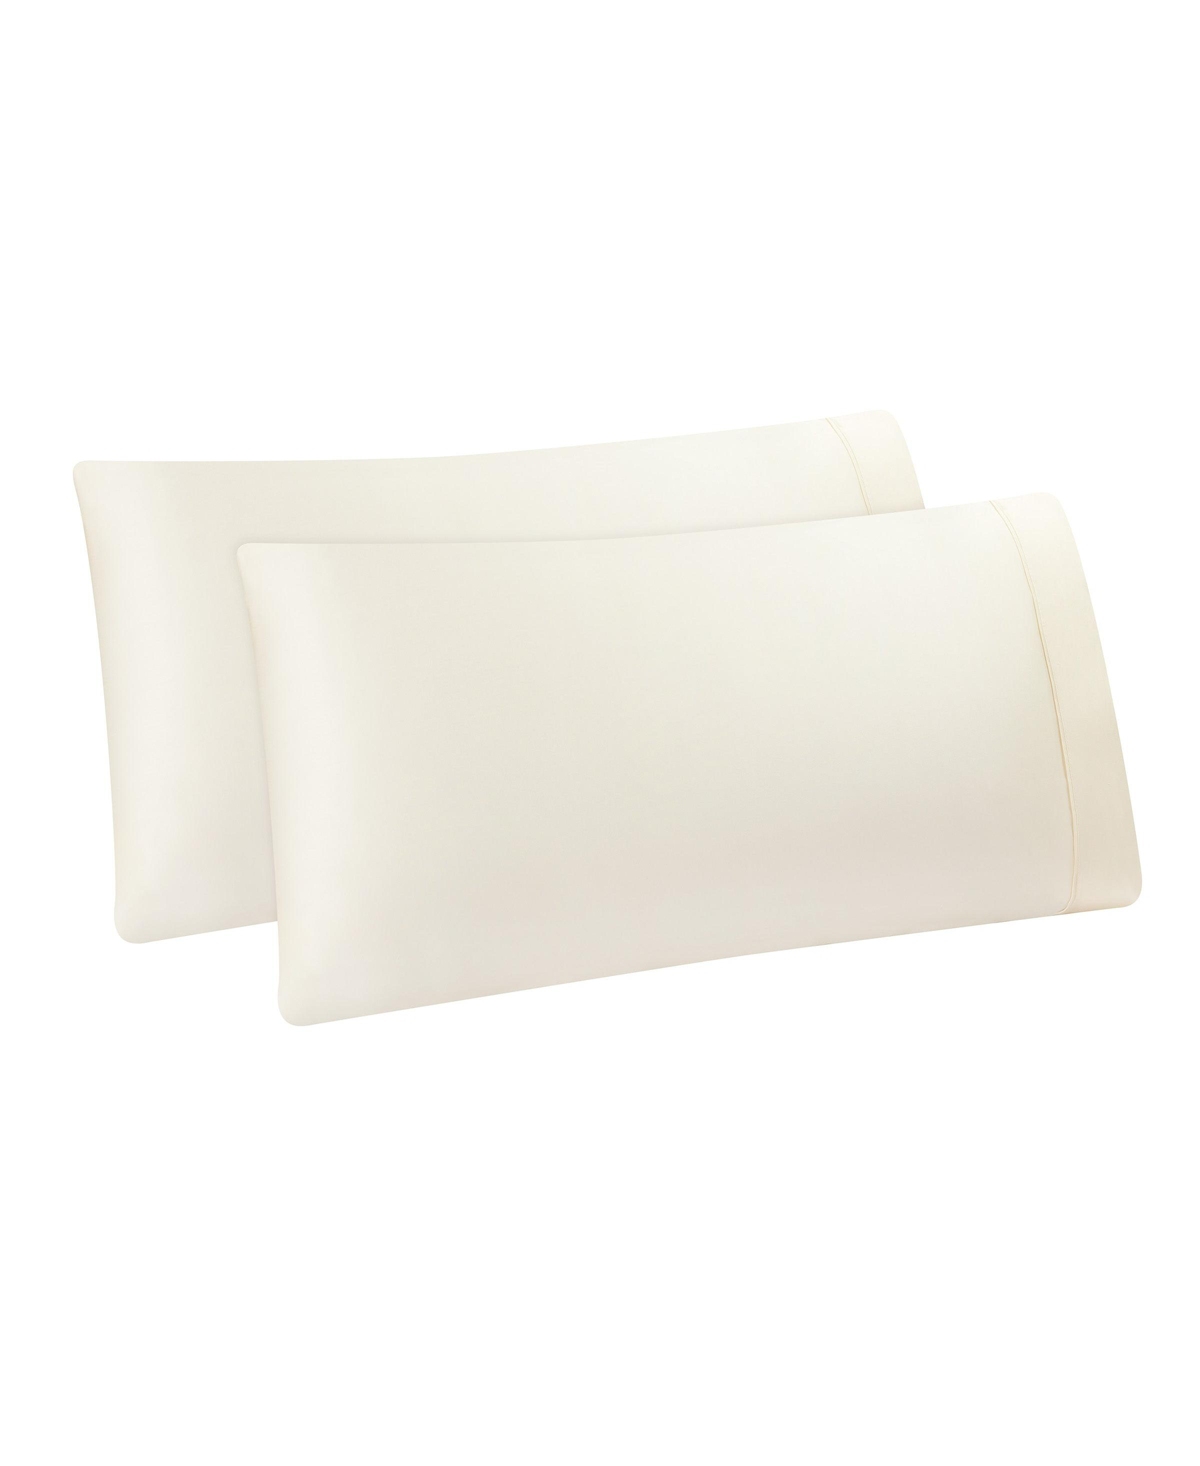 Aston And Arden Eucalyptus Tencel King Size Pillowcase Pairs, Ultra Soft, Cooling, Eco-friendly, Sus In Cream